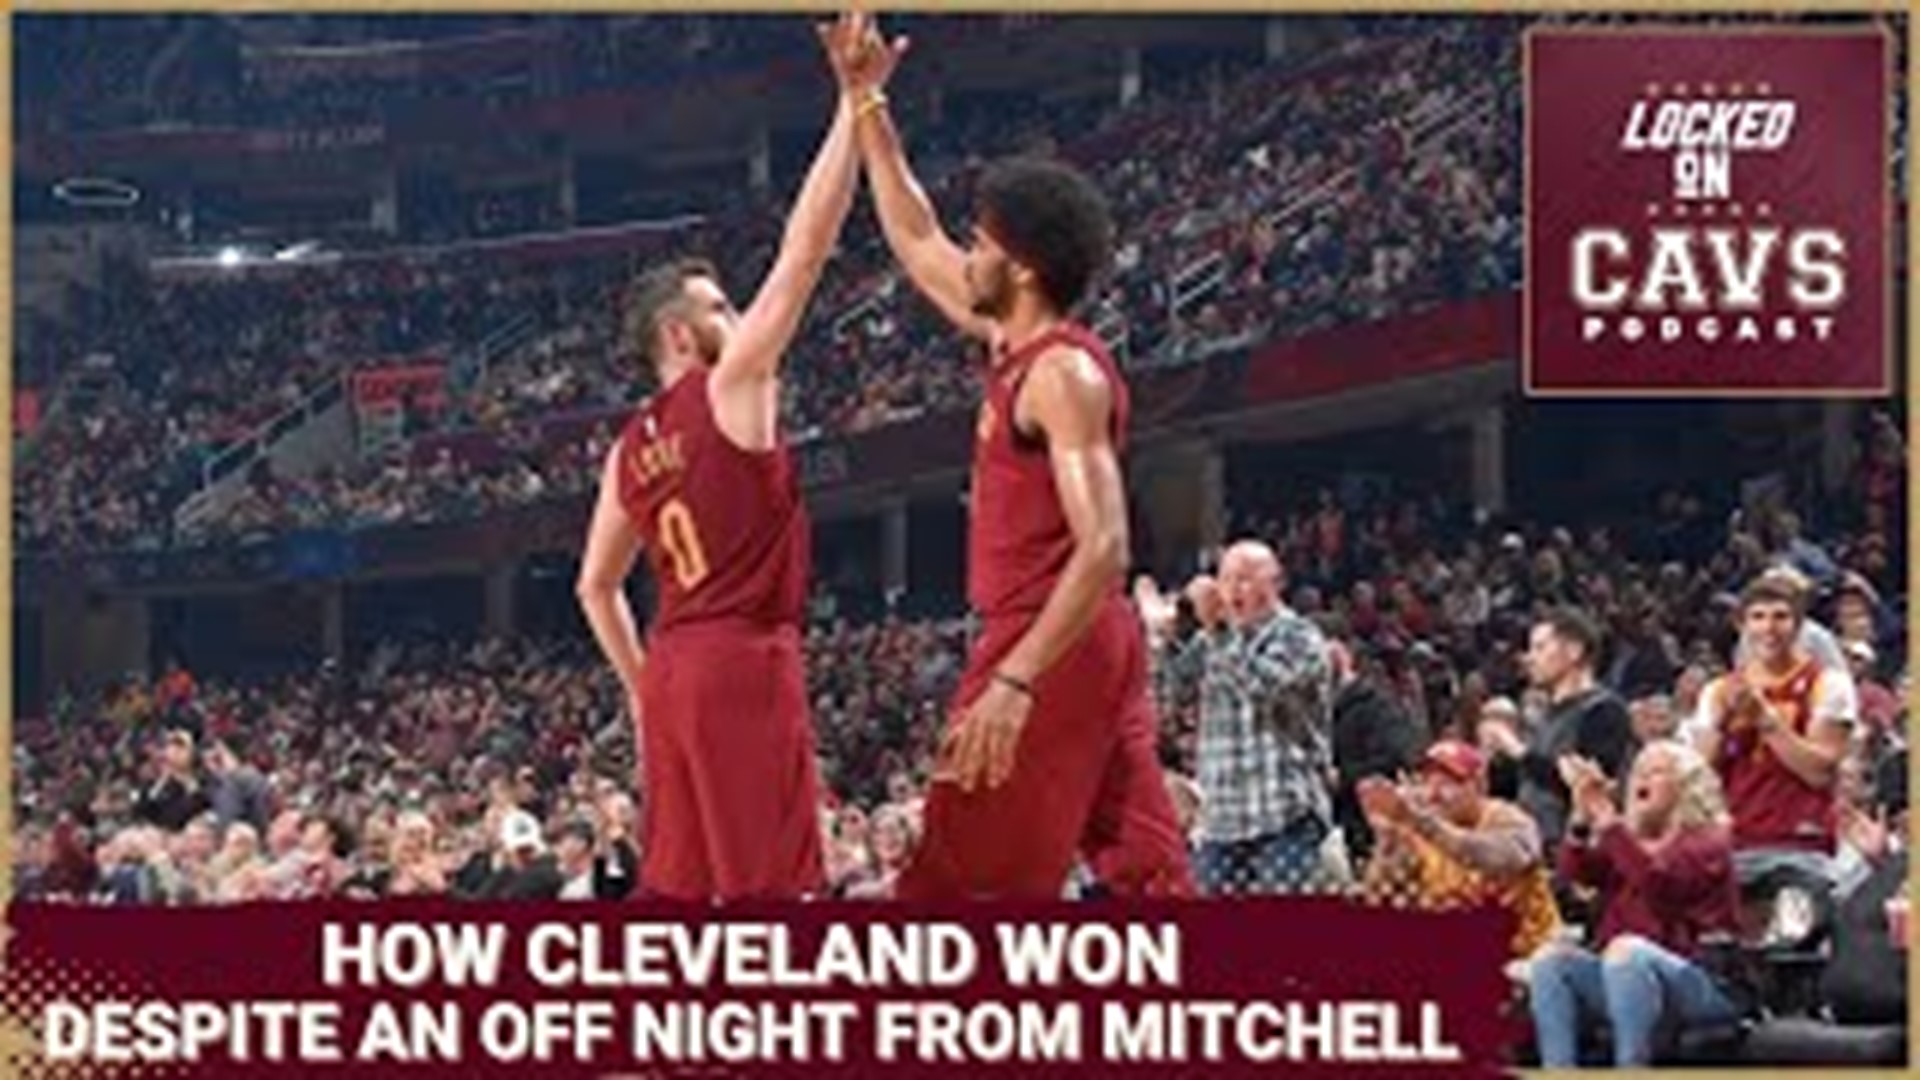 Chris Manning and Evan Dammarell discuss the Cleveland Cavaliers' win over the Orlando Magic.